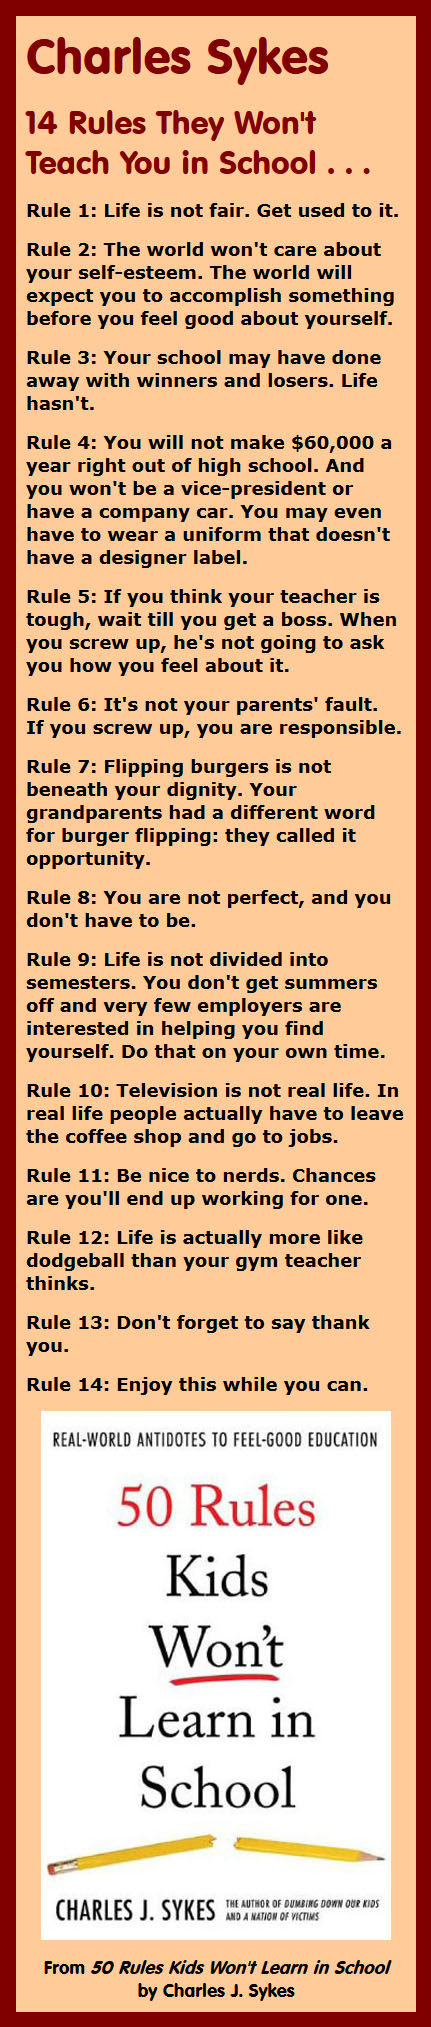 14 Rules of Life They Don't Teach in School